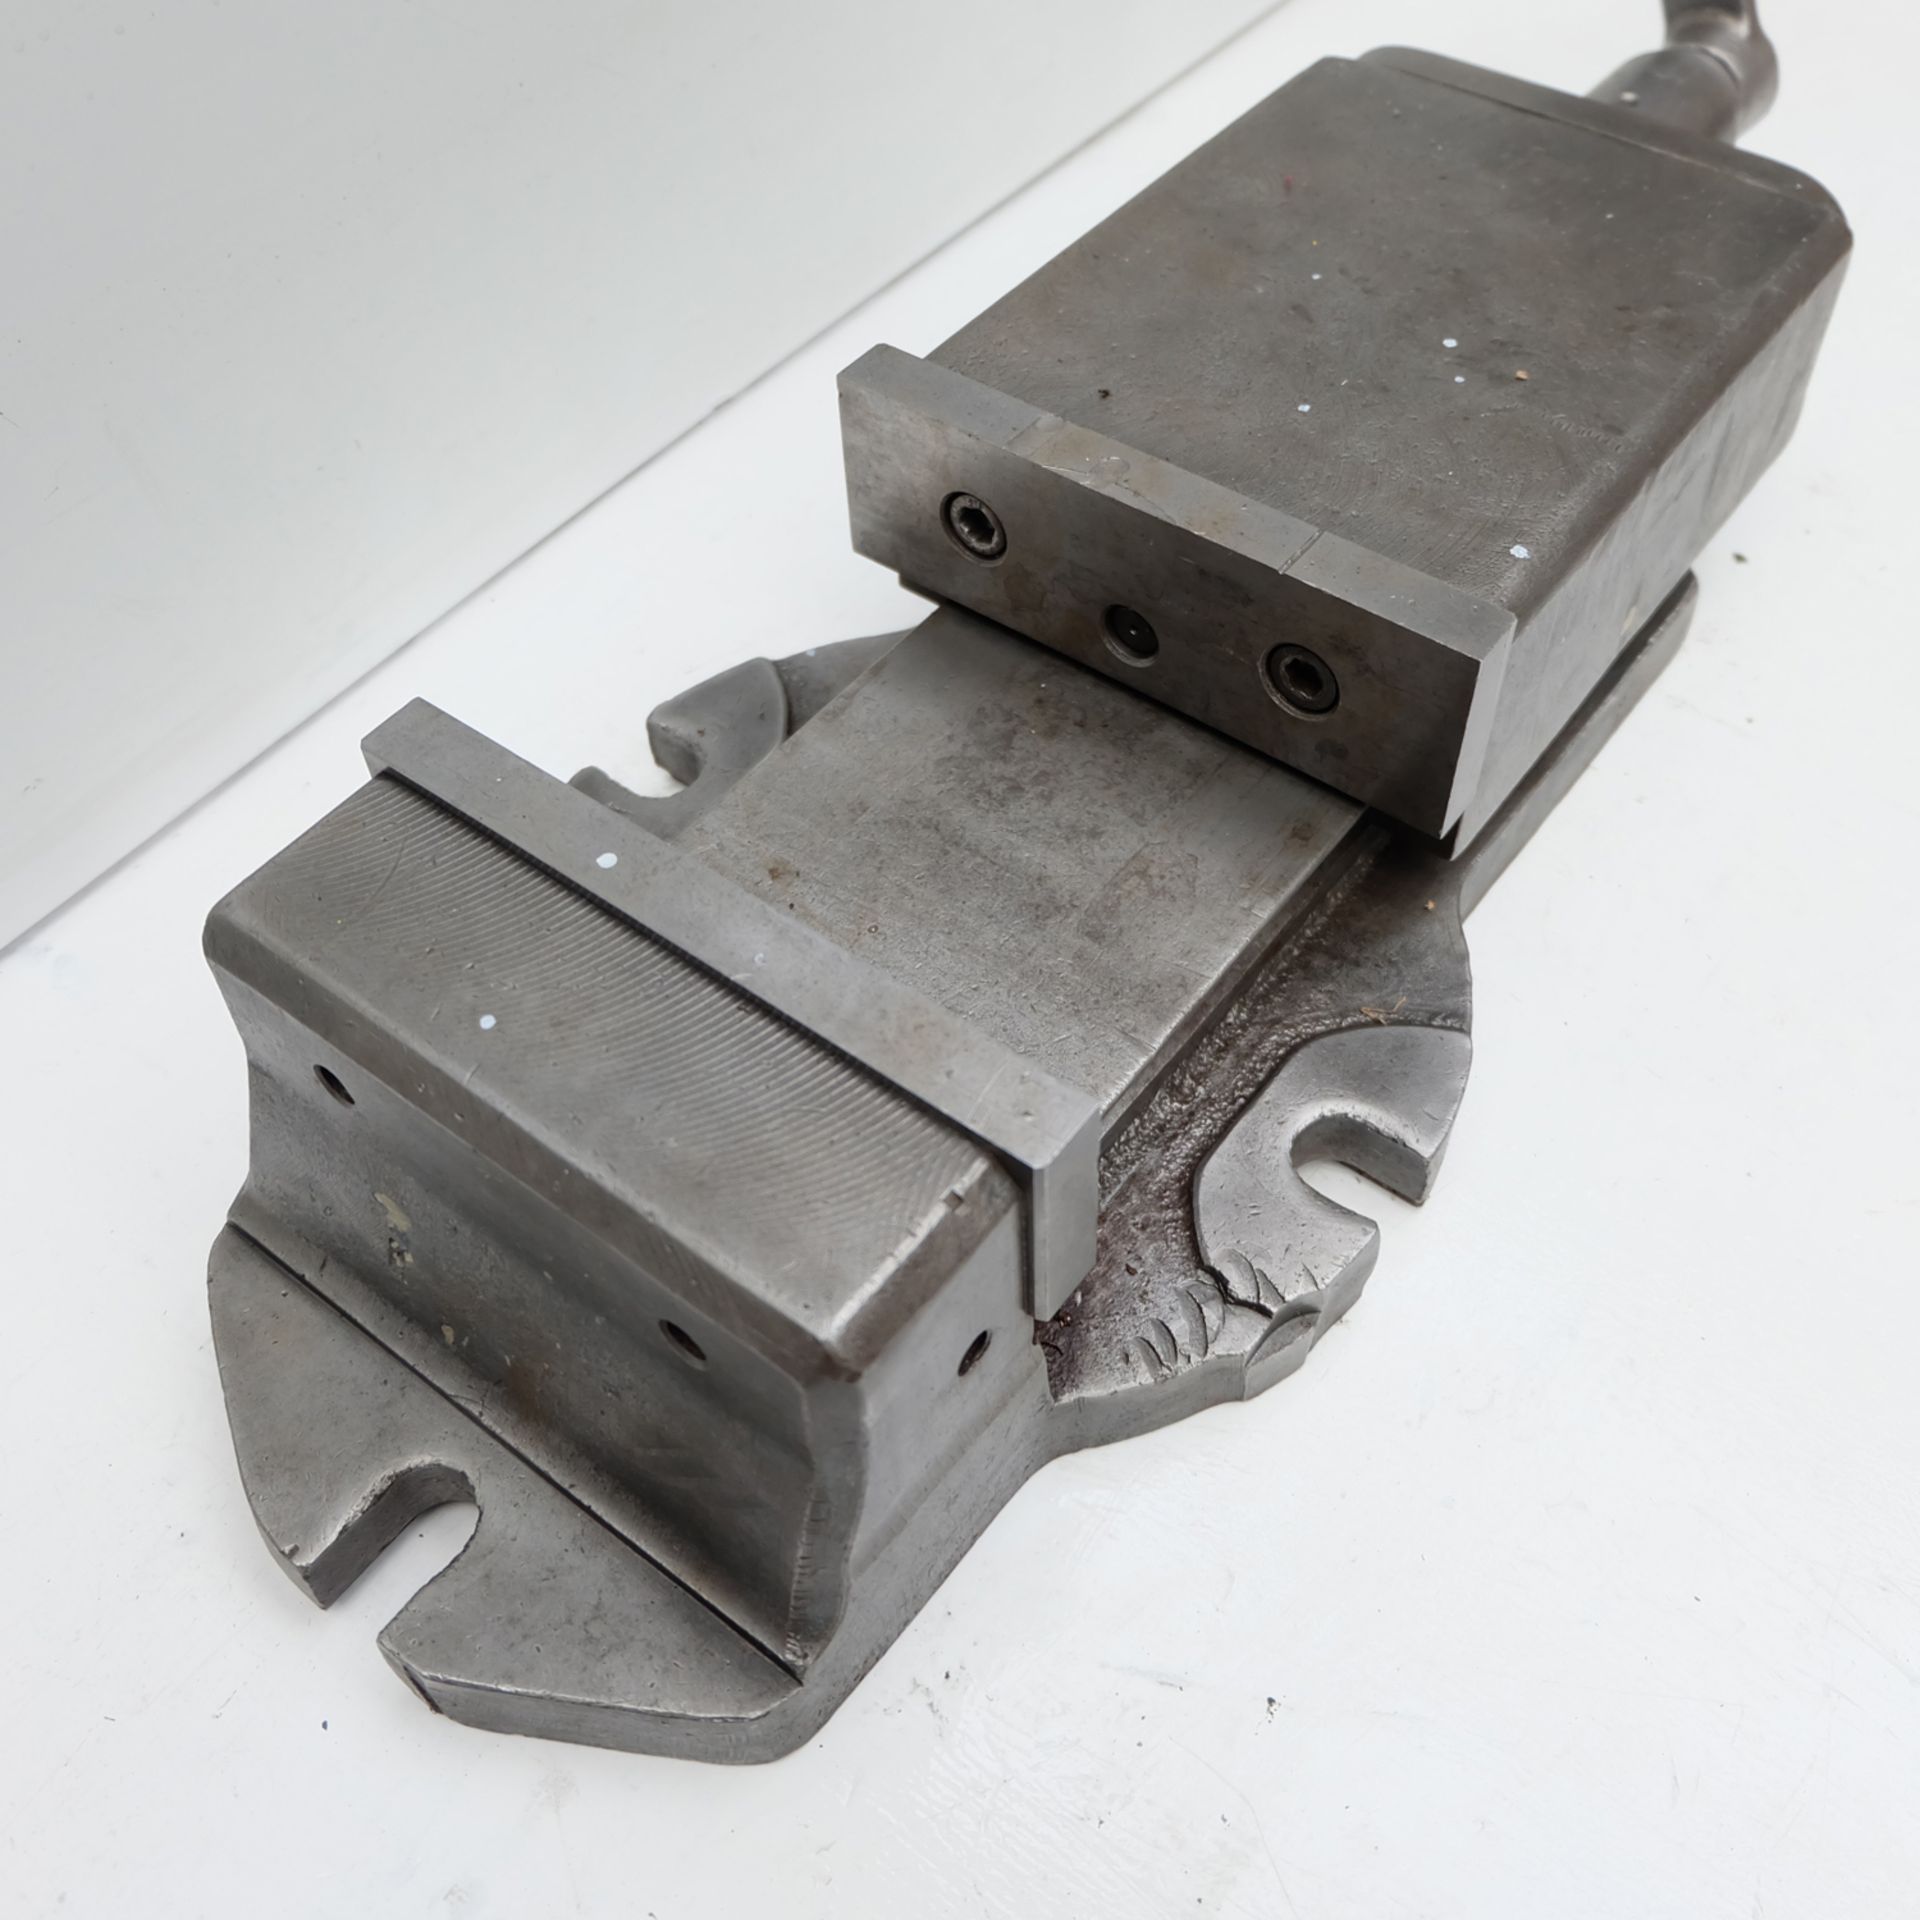 Machine Vice. Jaw Width 6". Jaw Height 2". - Image 3 of 4